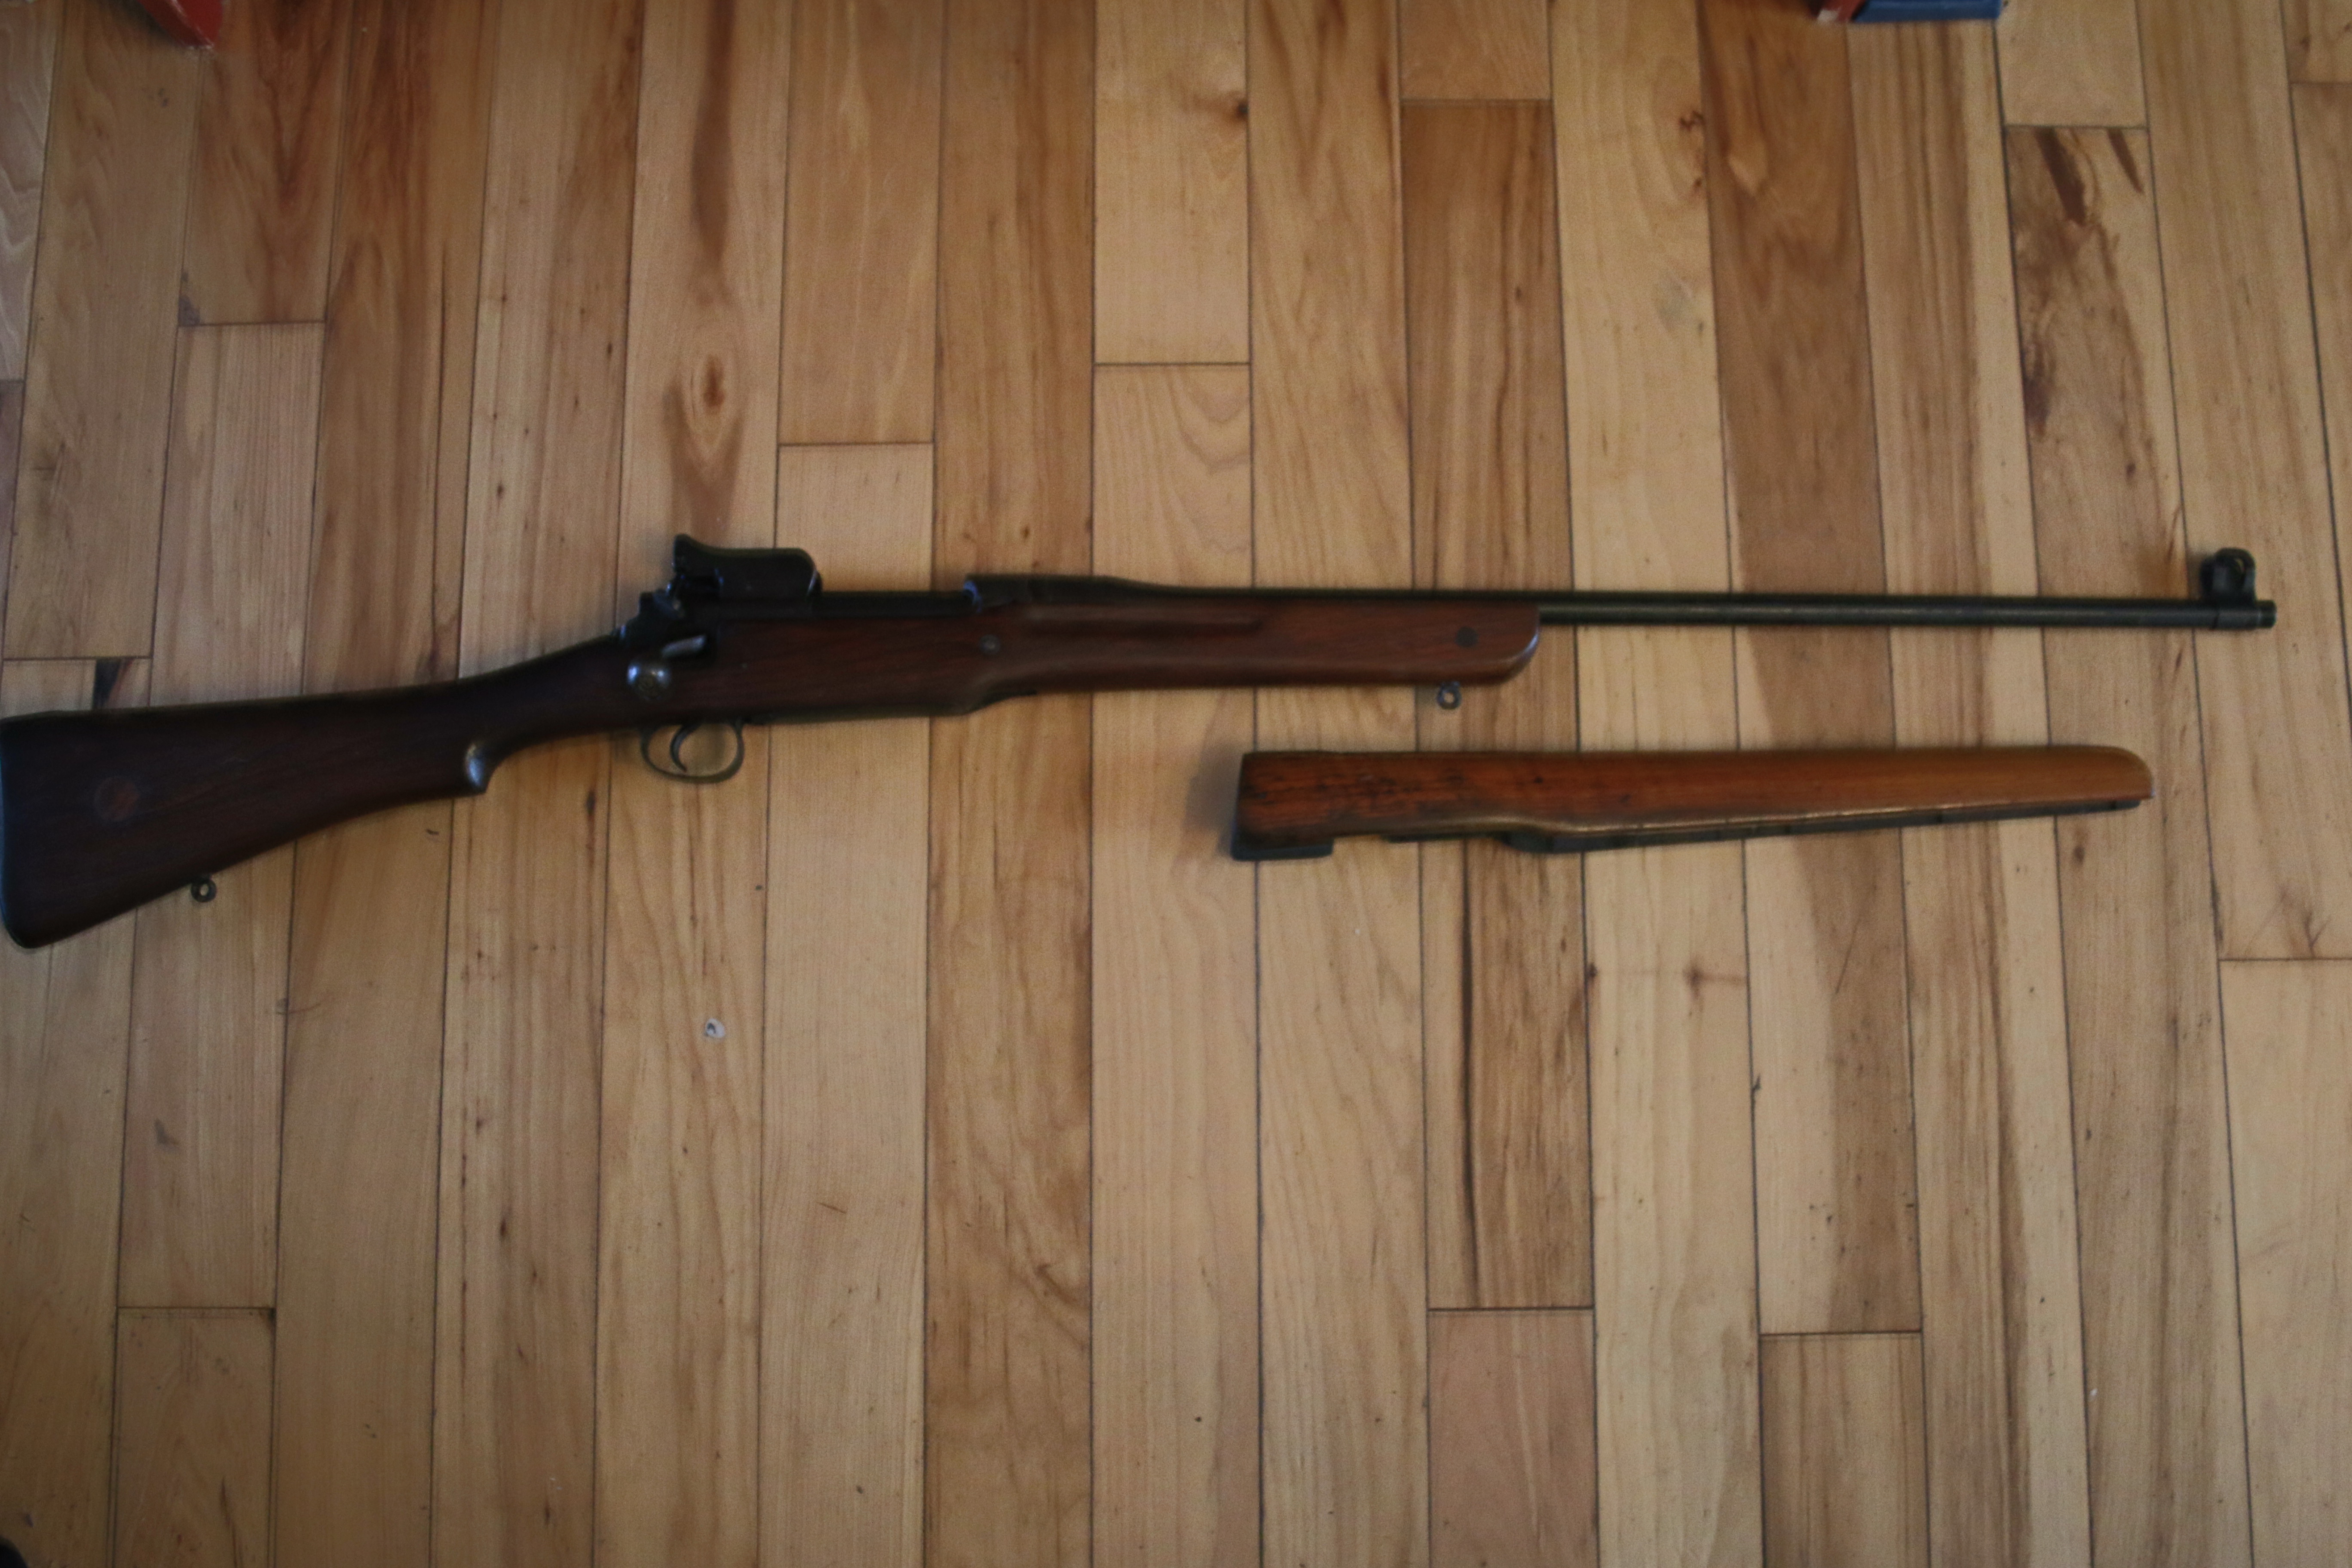 Showing old SMLE sporter stock